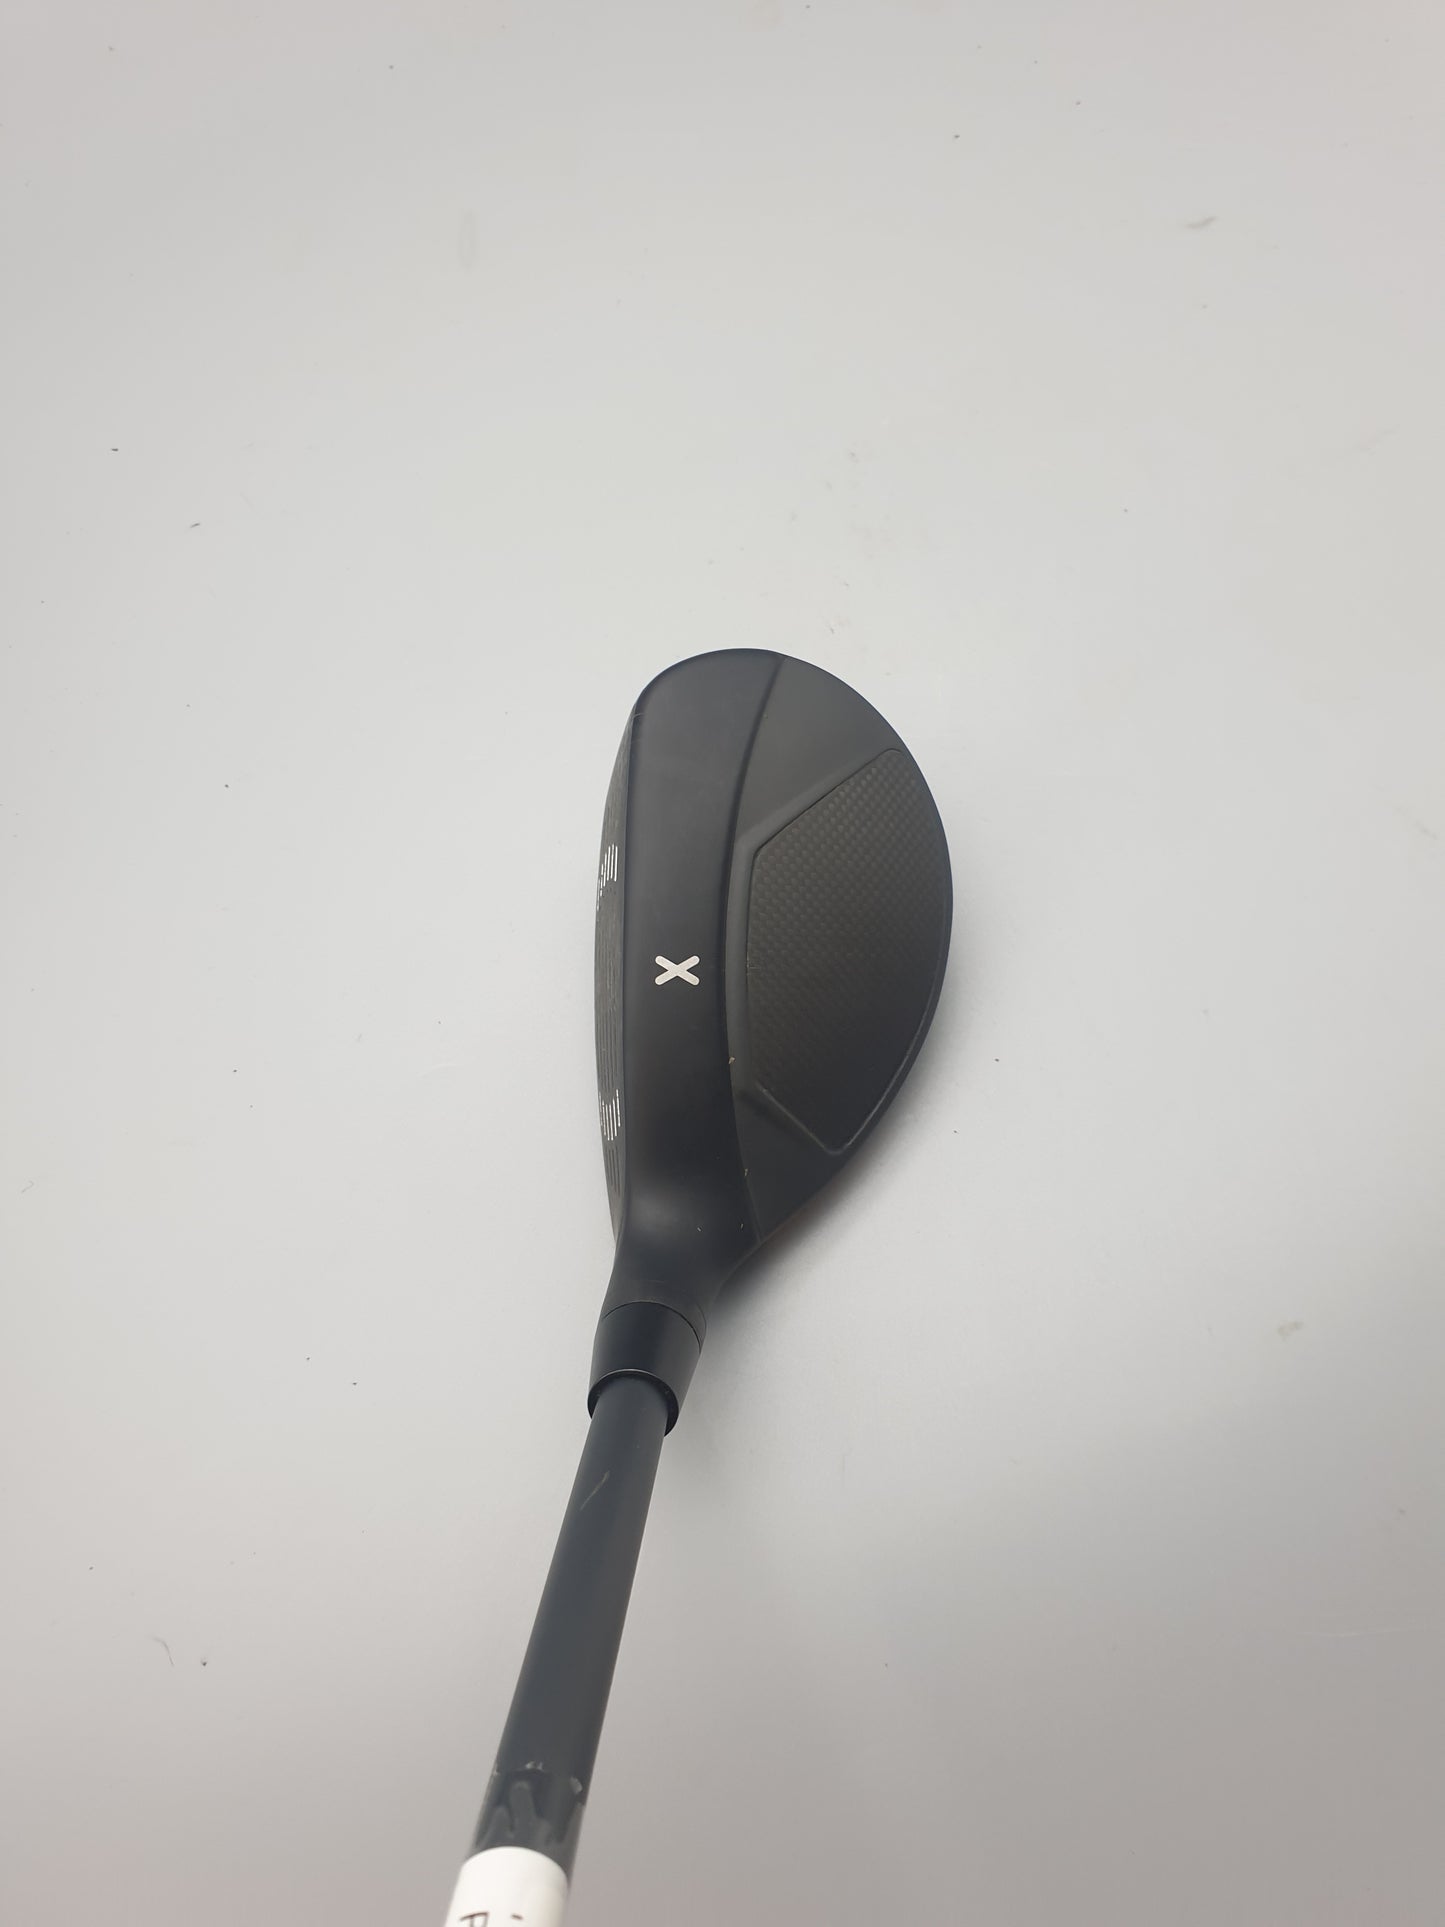 PXG 0317 X Hybrid 3/19 Hzrdus 6.0 80G Right Hand - USED